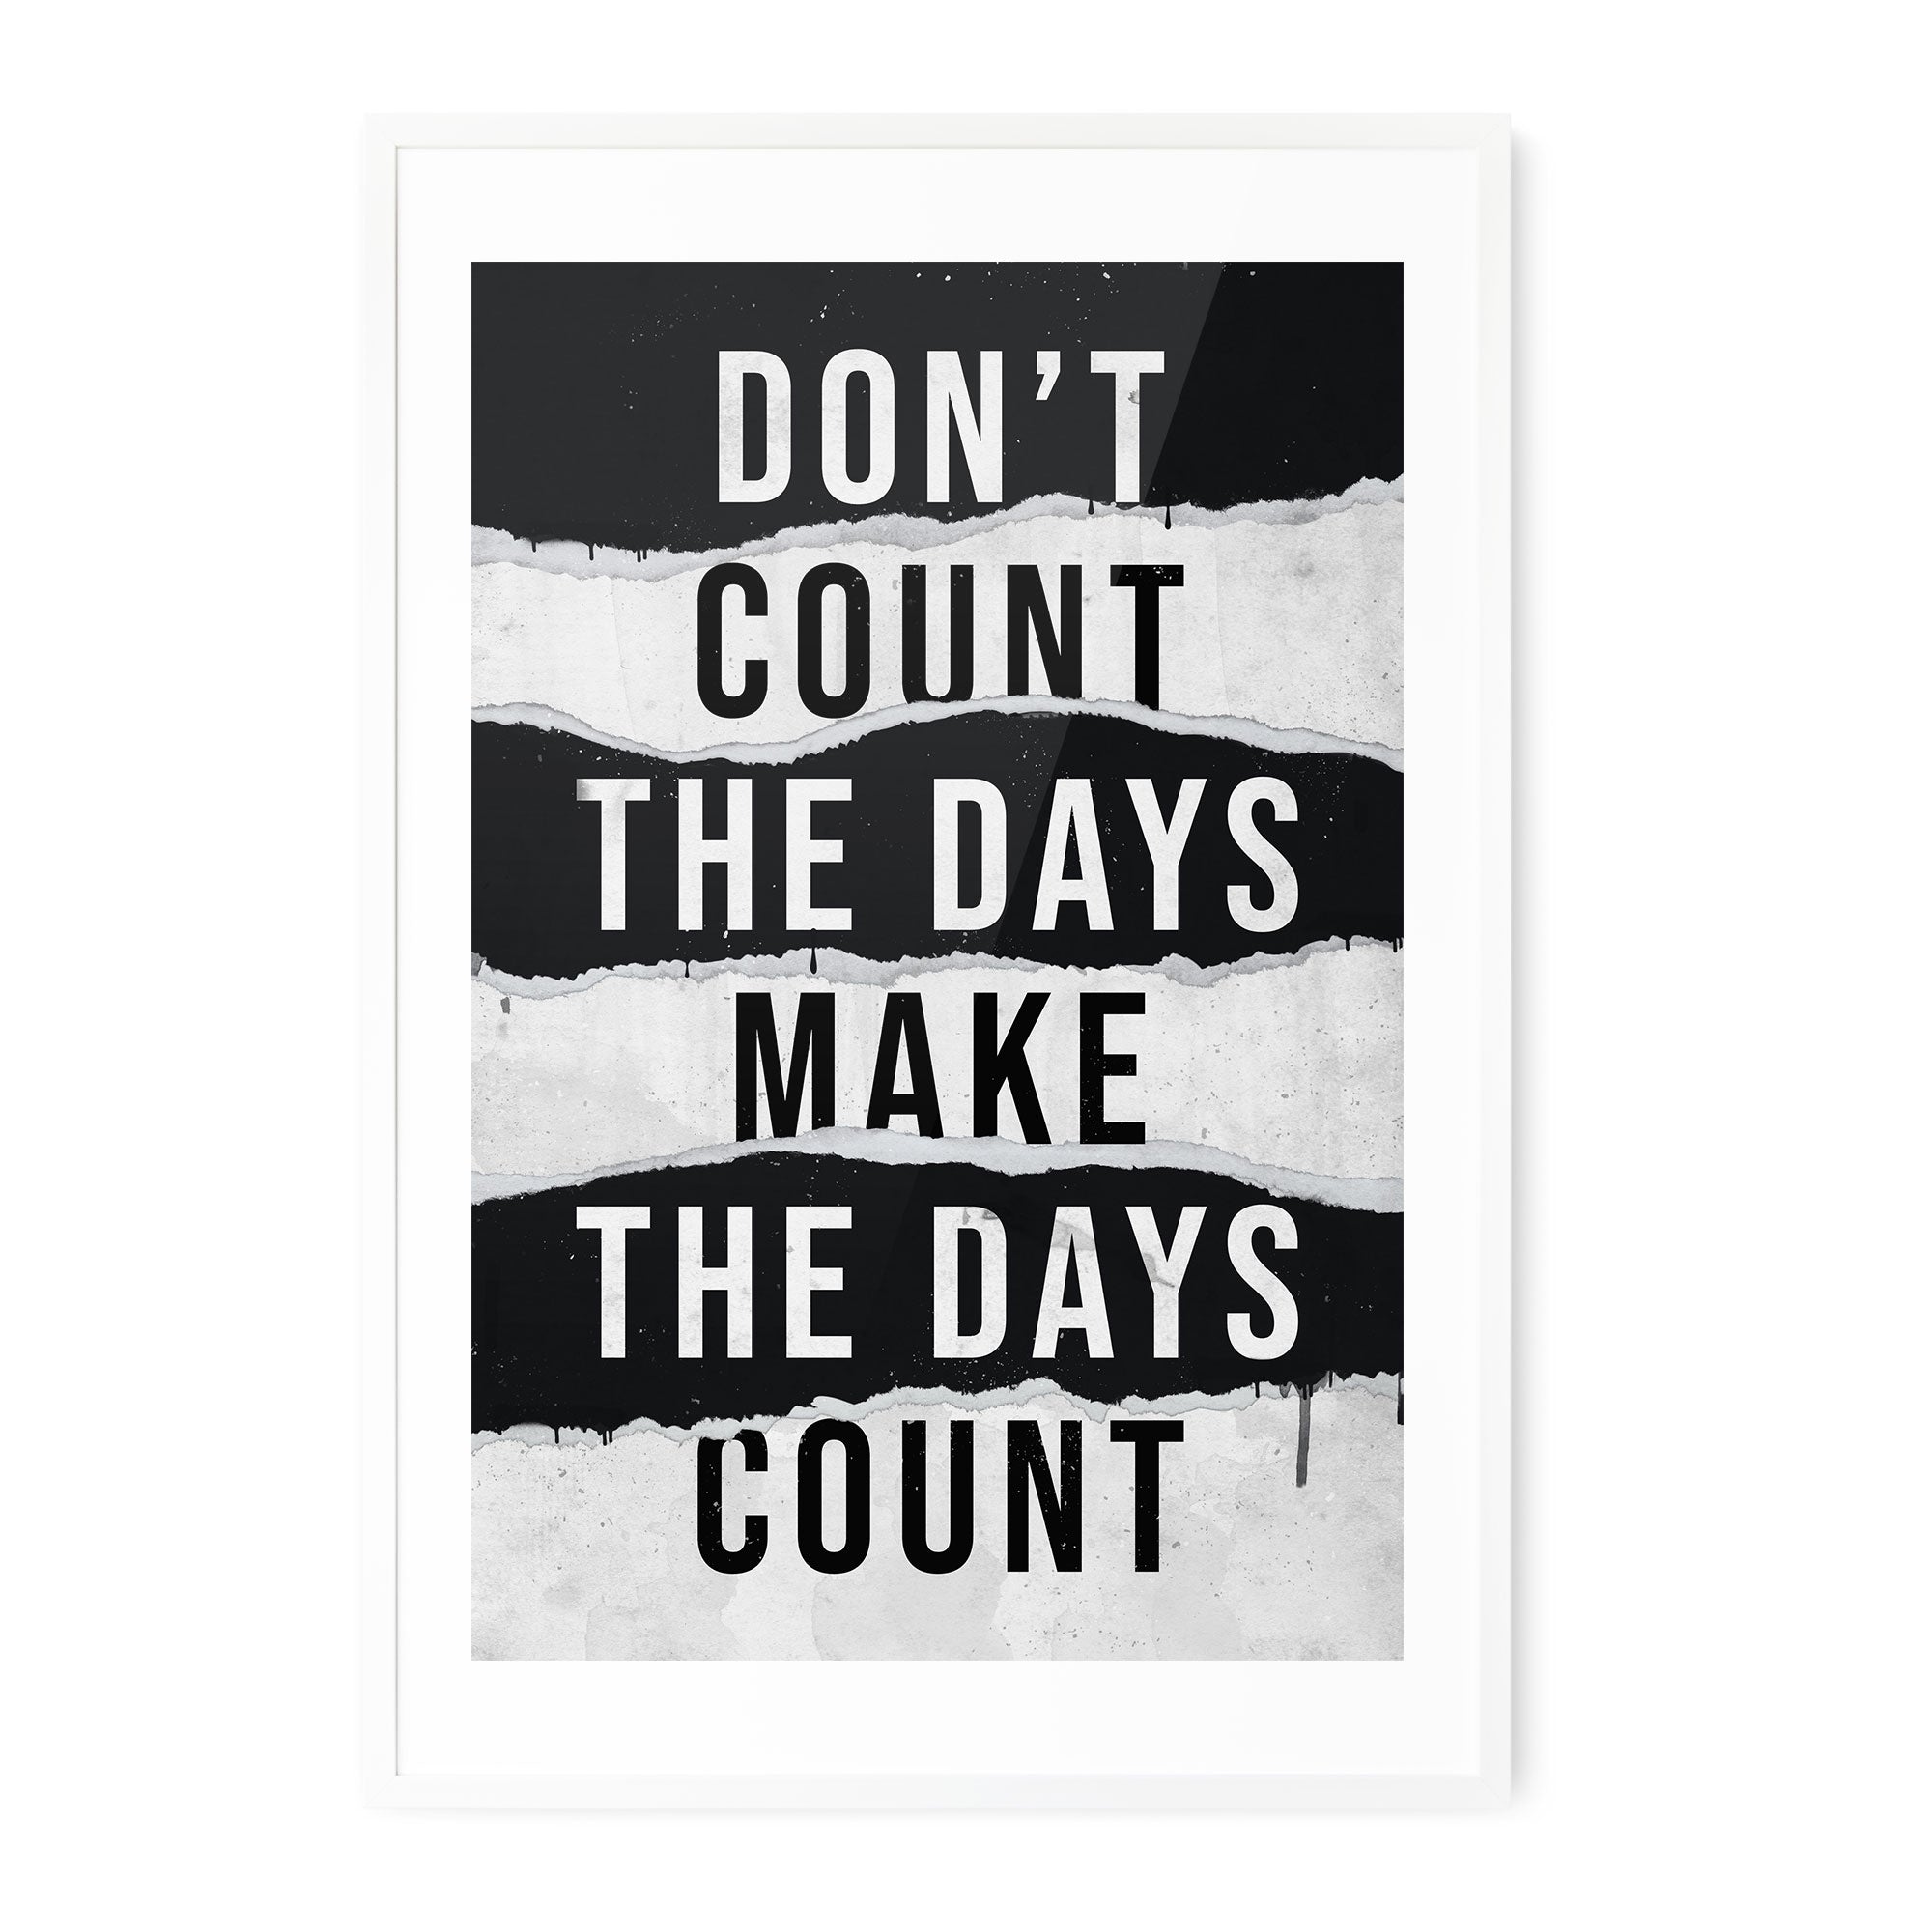 Make the Days Count